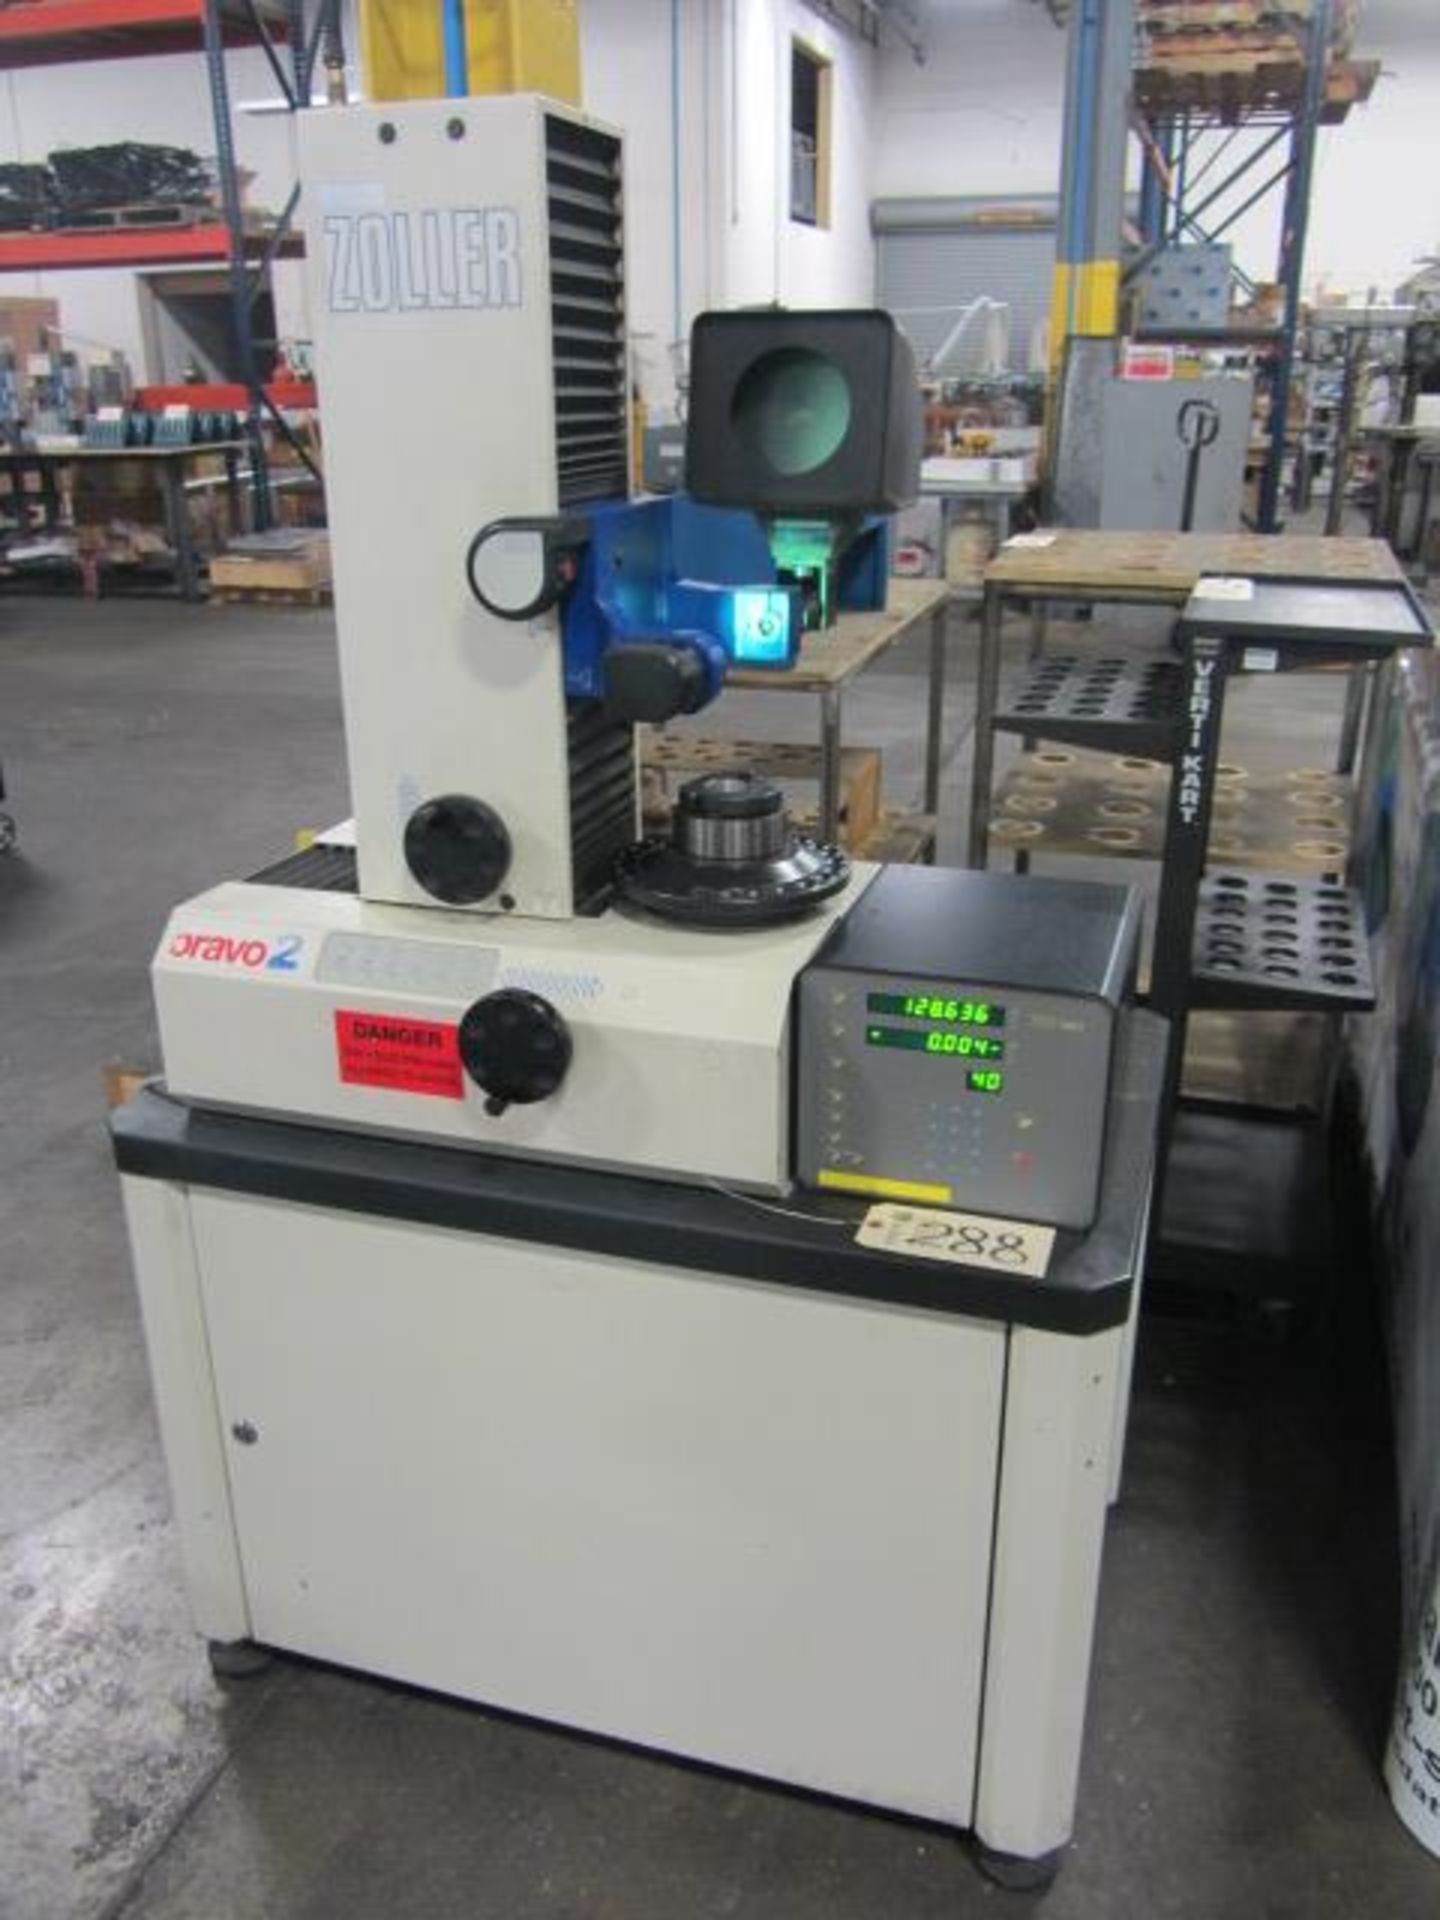 Zoller Bravo 2 50/40 Taper Programmable Tool Presetter with Zoller 6051 Control, Readout, sn:0423